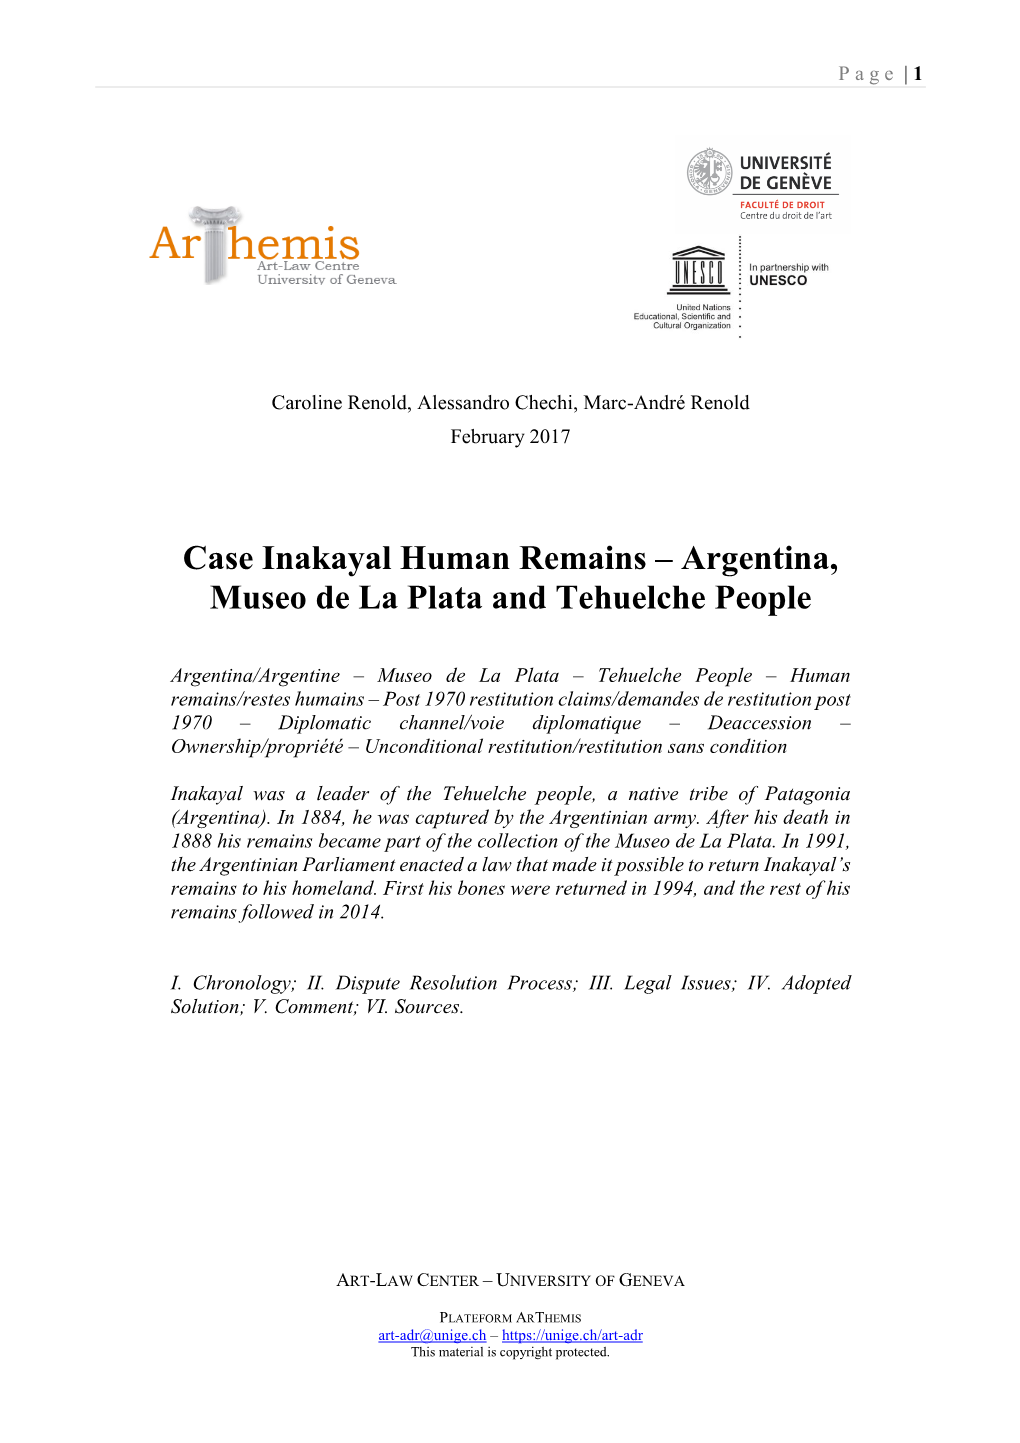 Case Inakayal Human Remains – Argentina, Museo De La Plata and Tehuelche People